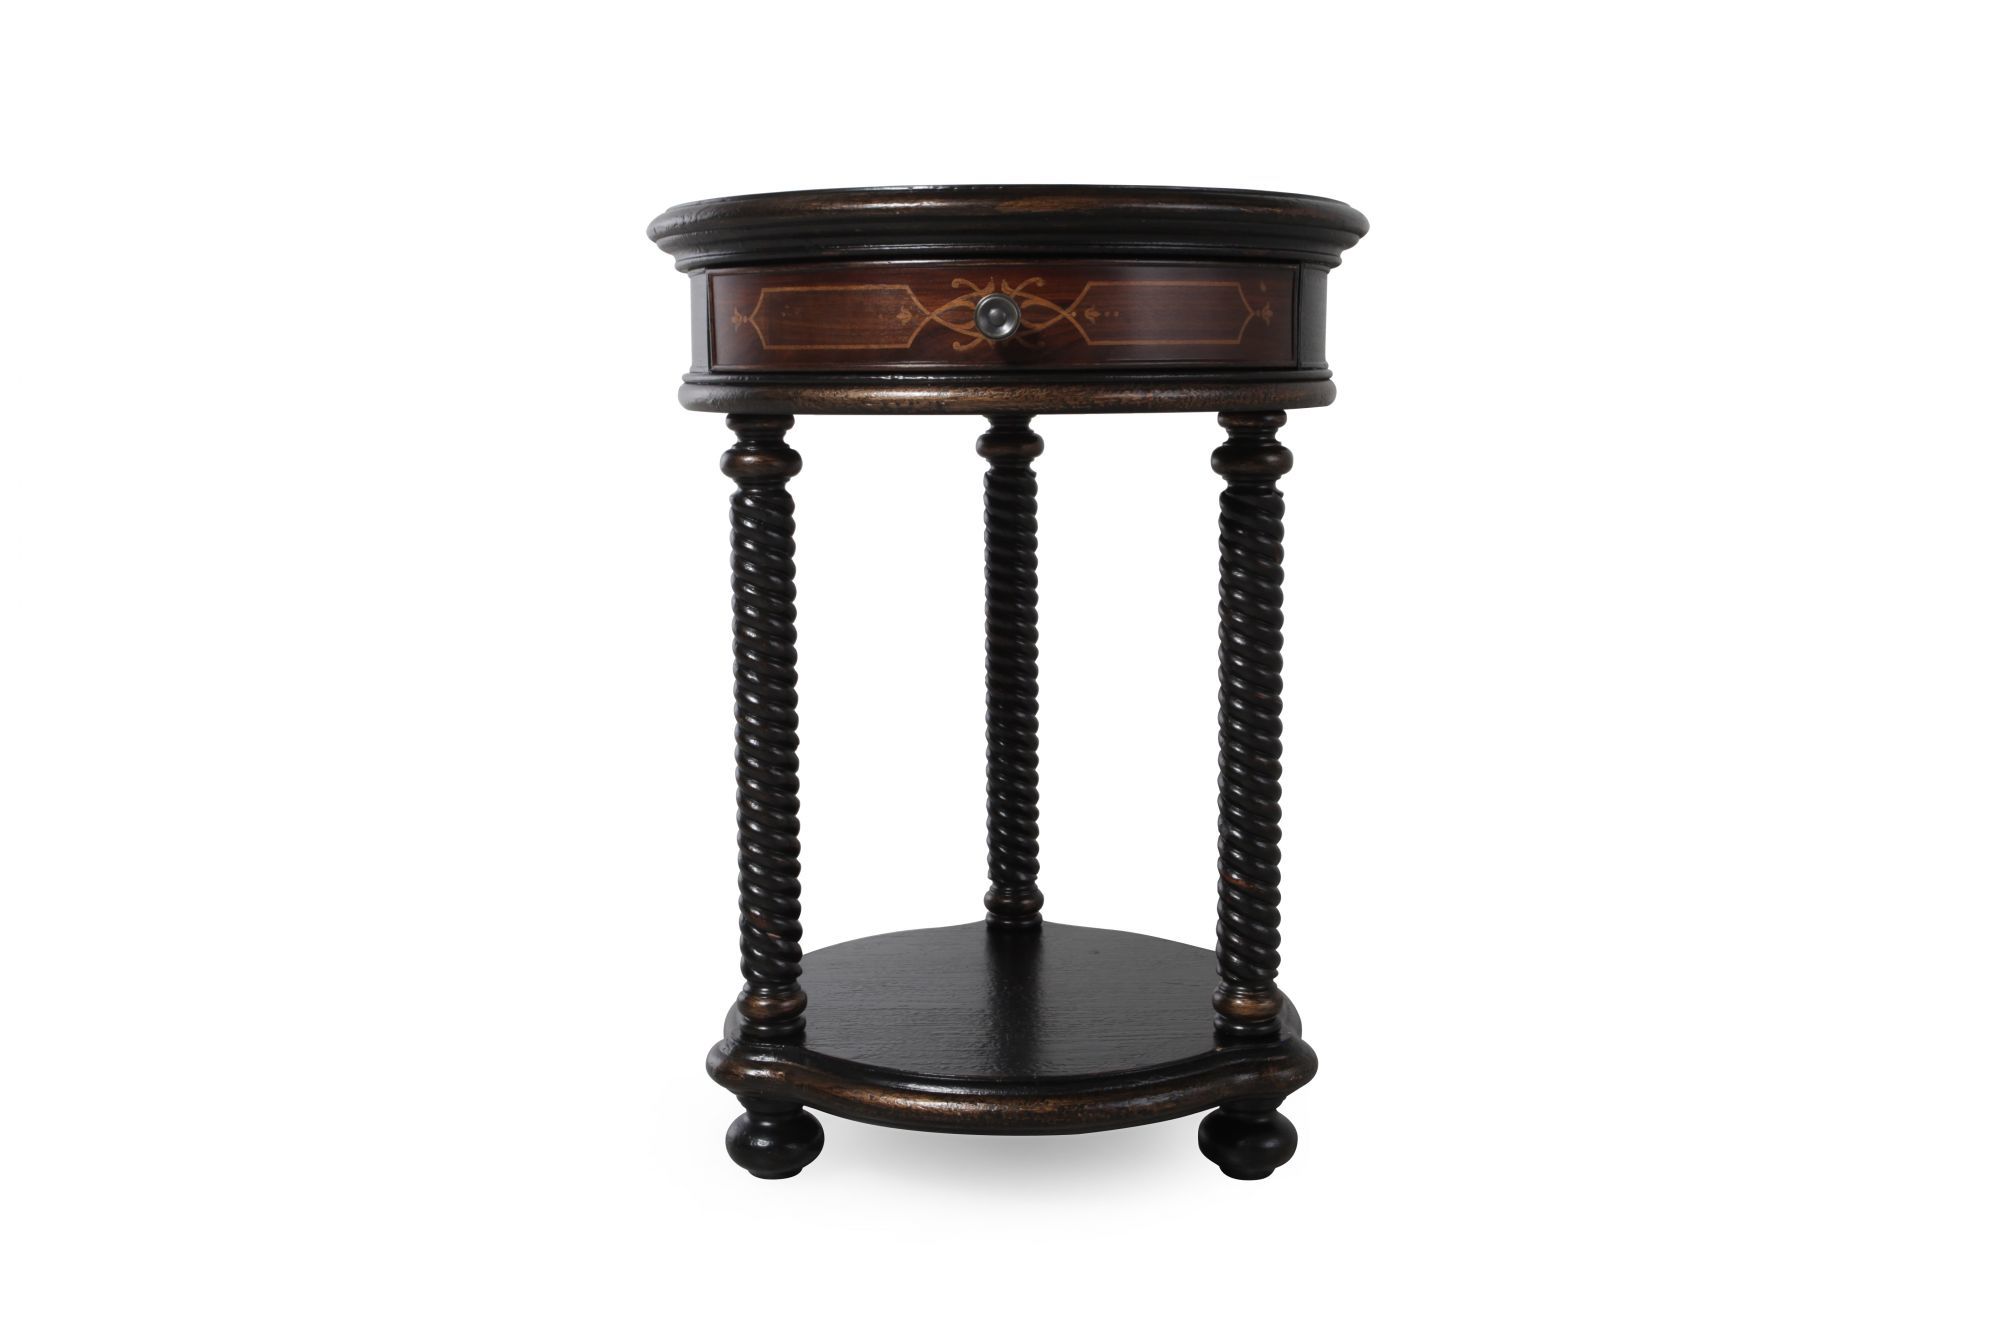 twisted legs traditional round accent table black mathis hook pedestal mosaic patio side console with baskets target standing lamp small whole shades behind sofa inch ethan allen